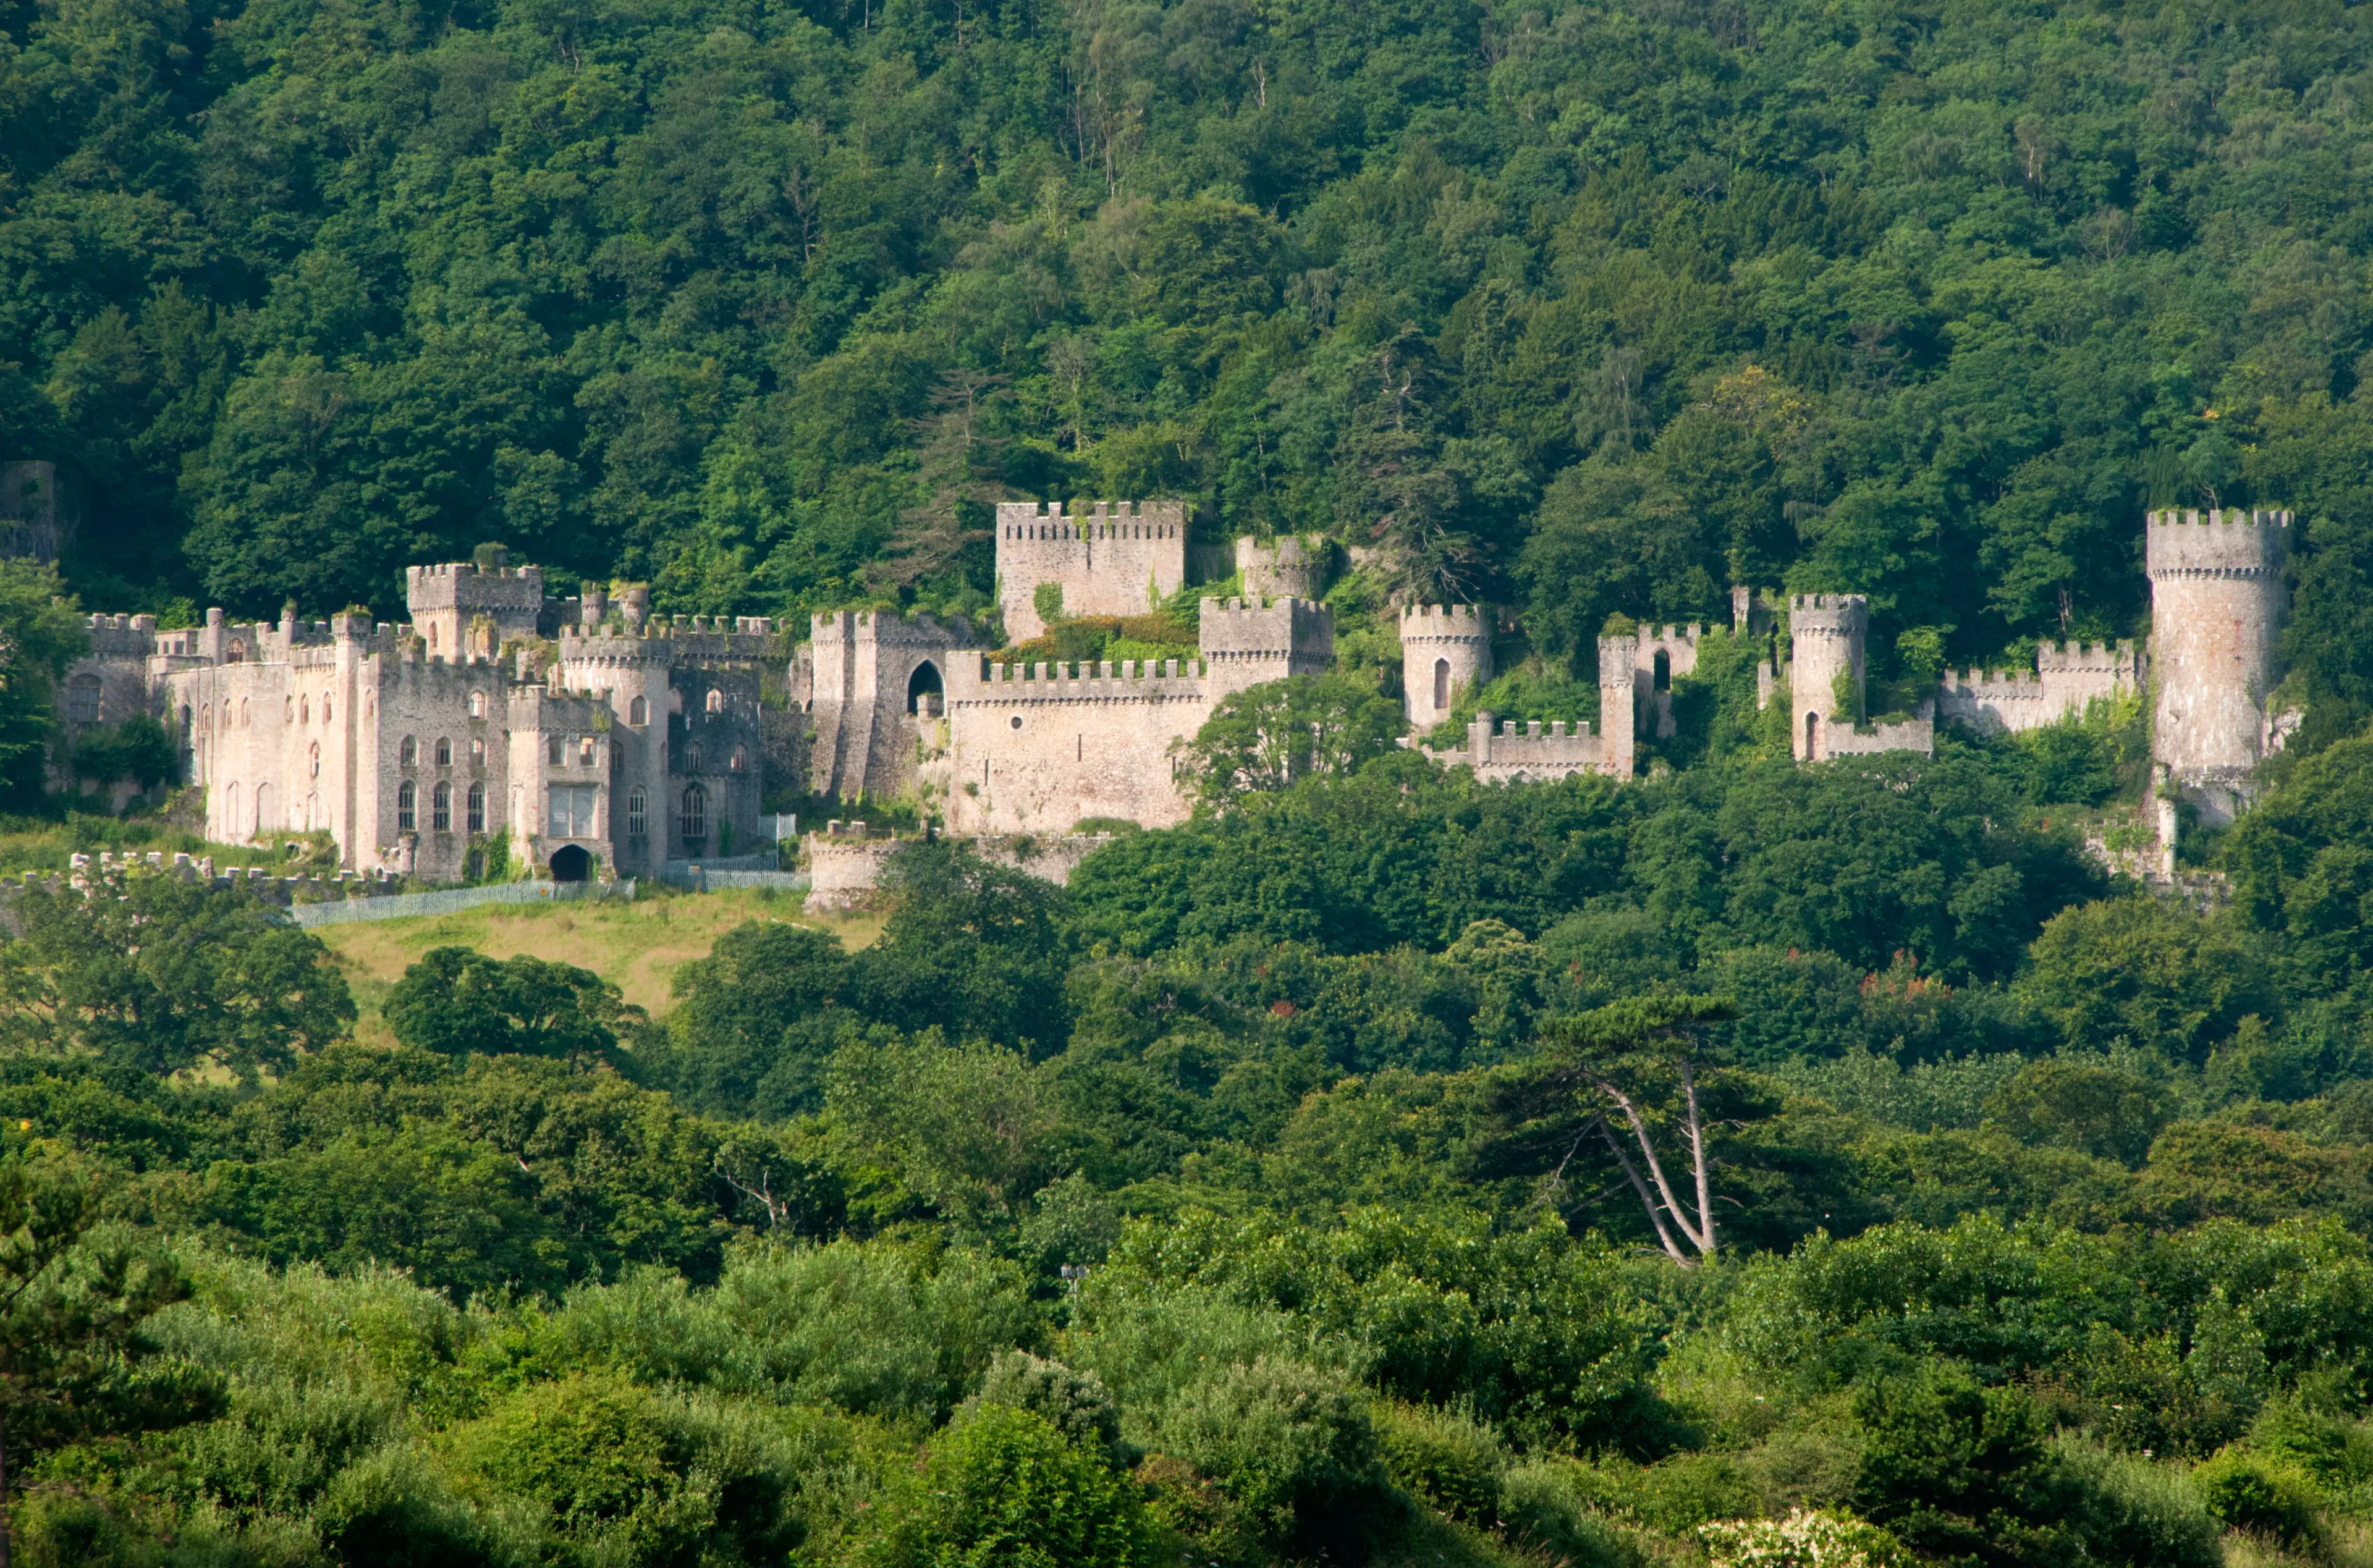 The show will return to Gwrych Castle.